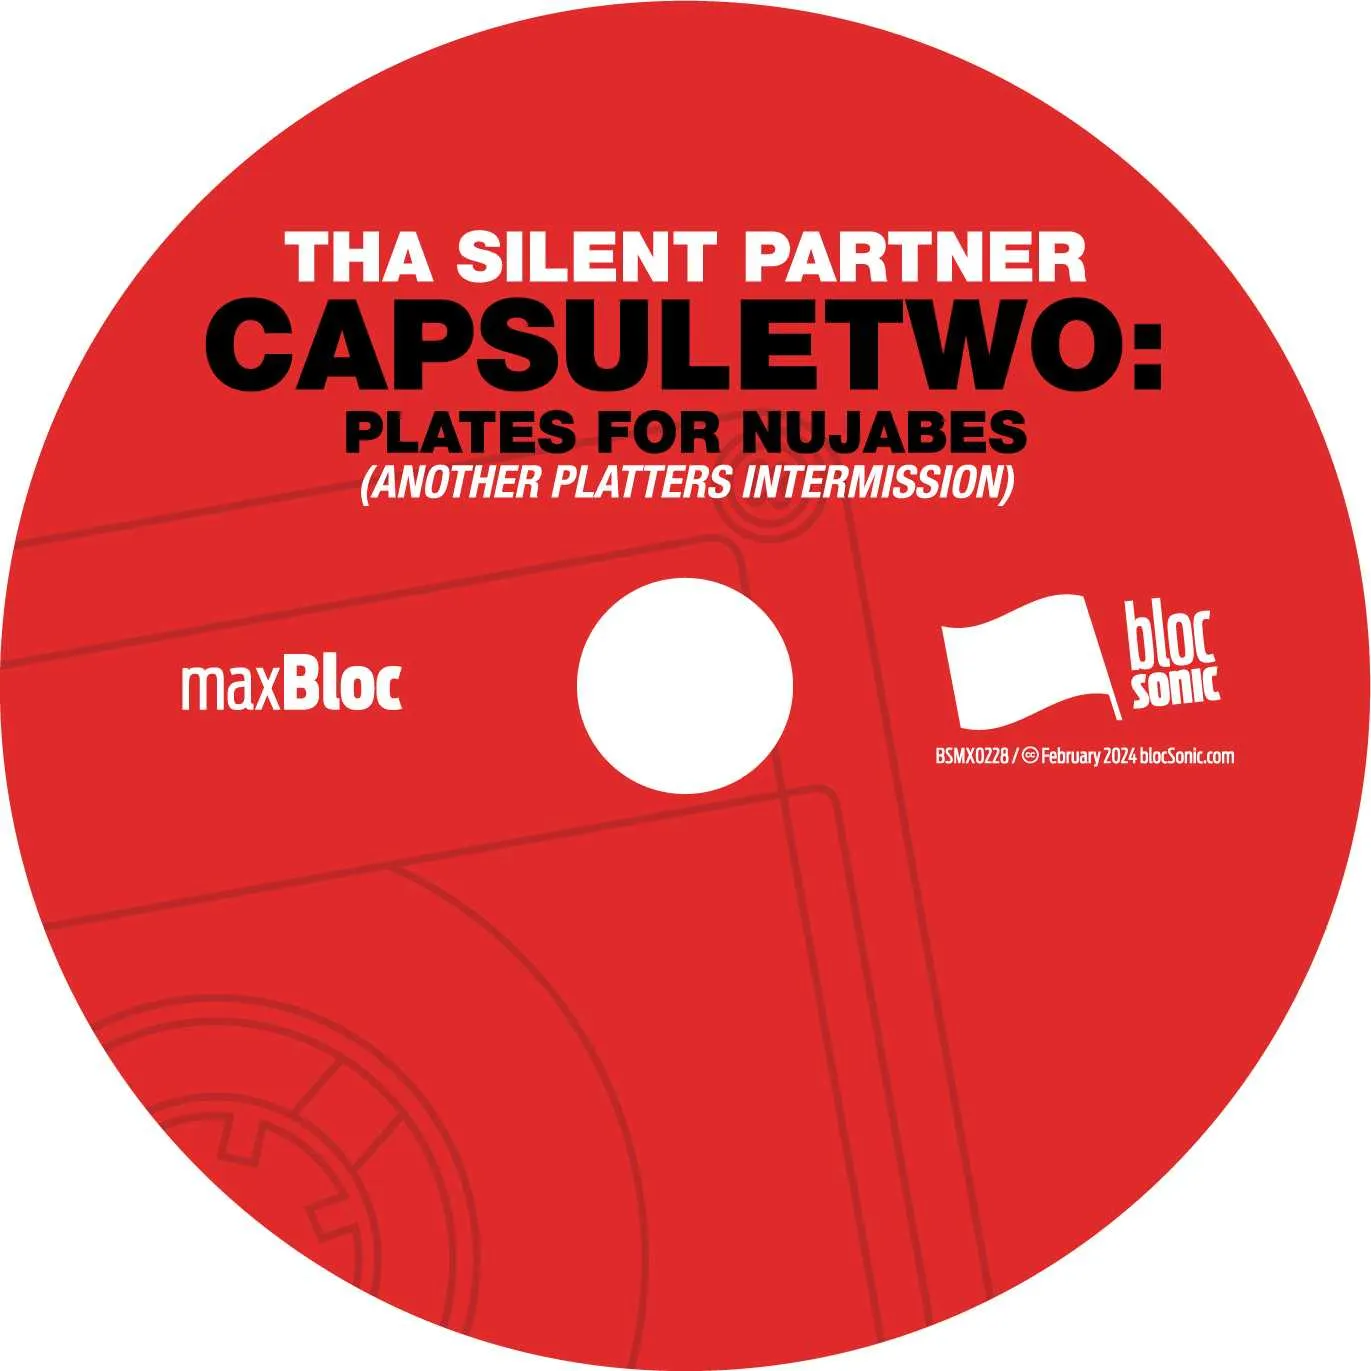 Album disc for “CAPSULETWO: Plates For Nujabes (Another Platters Intermission)” by Tha Silent Partner